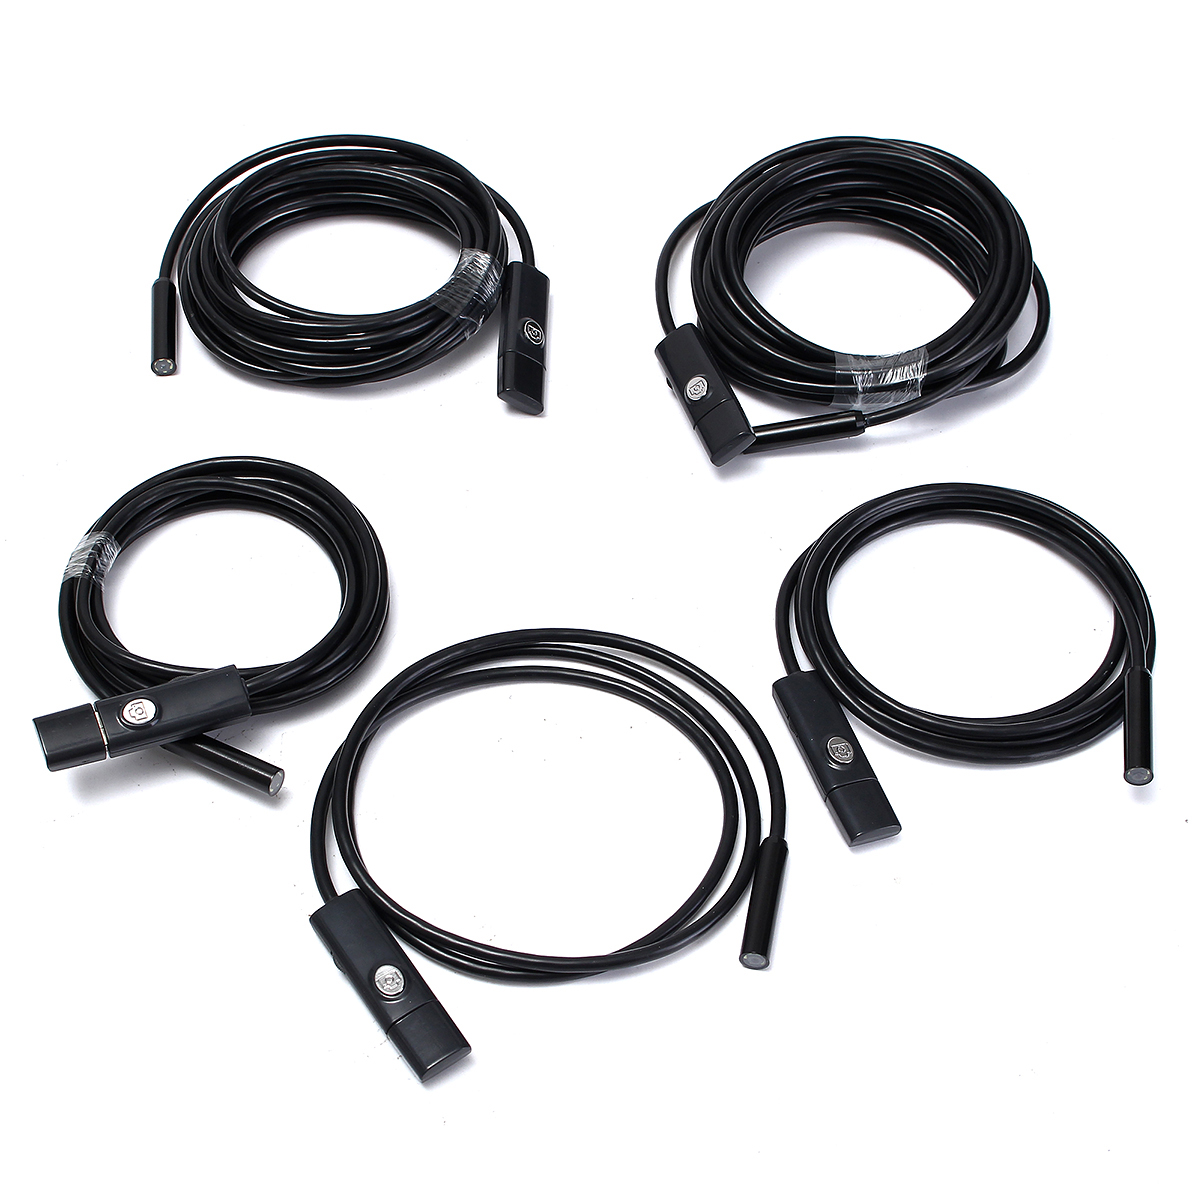 6-LED-9mm-Lens-Waterproof-IP67-USB-Wire-Borescope-Camera-Inspection-Borescope-Tube-Camera-for-Androi-1068605-9